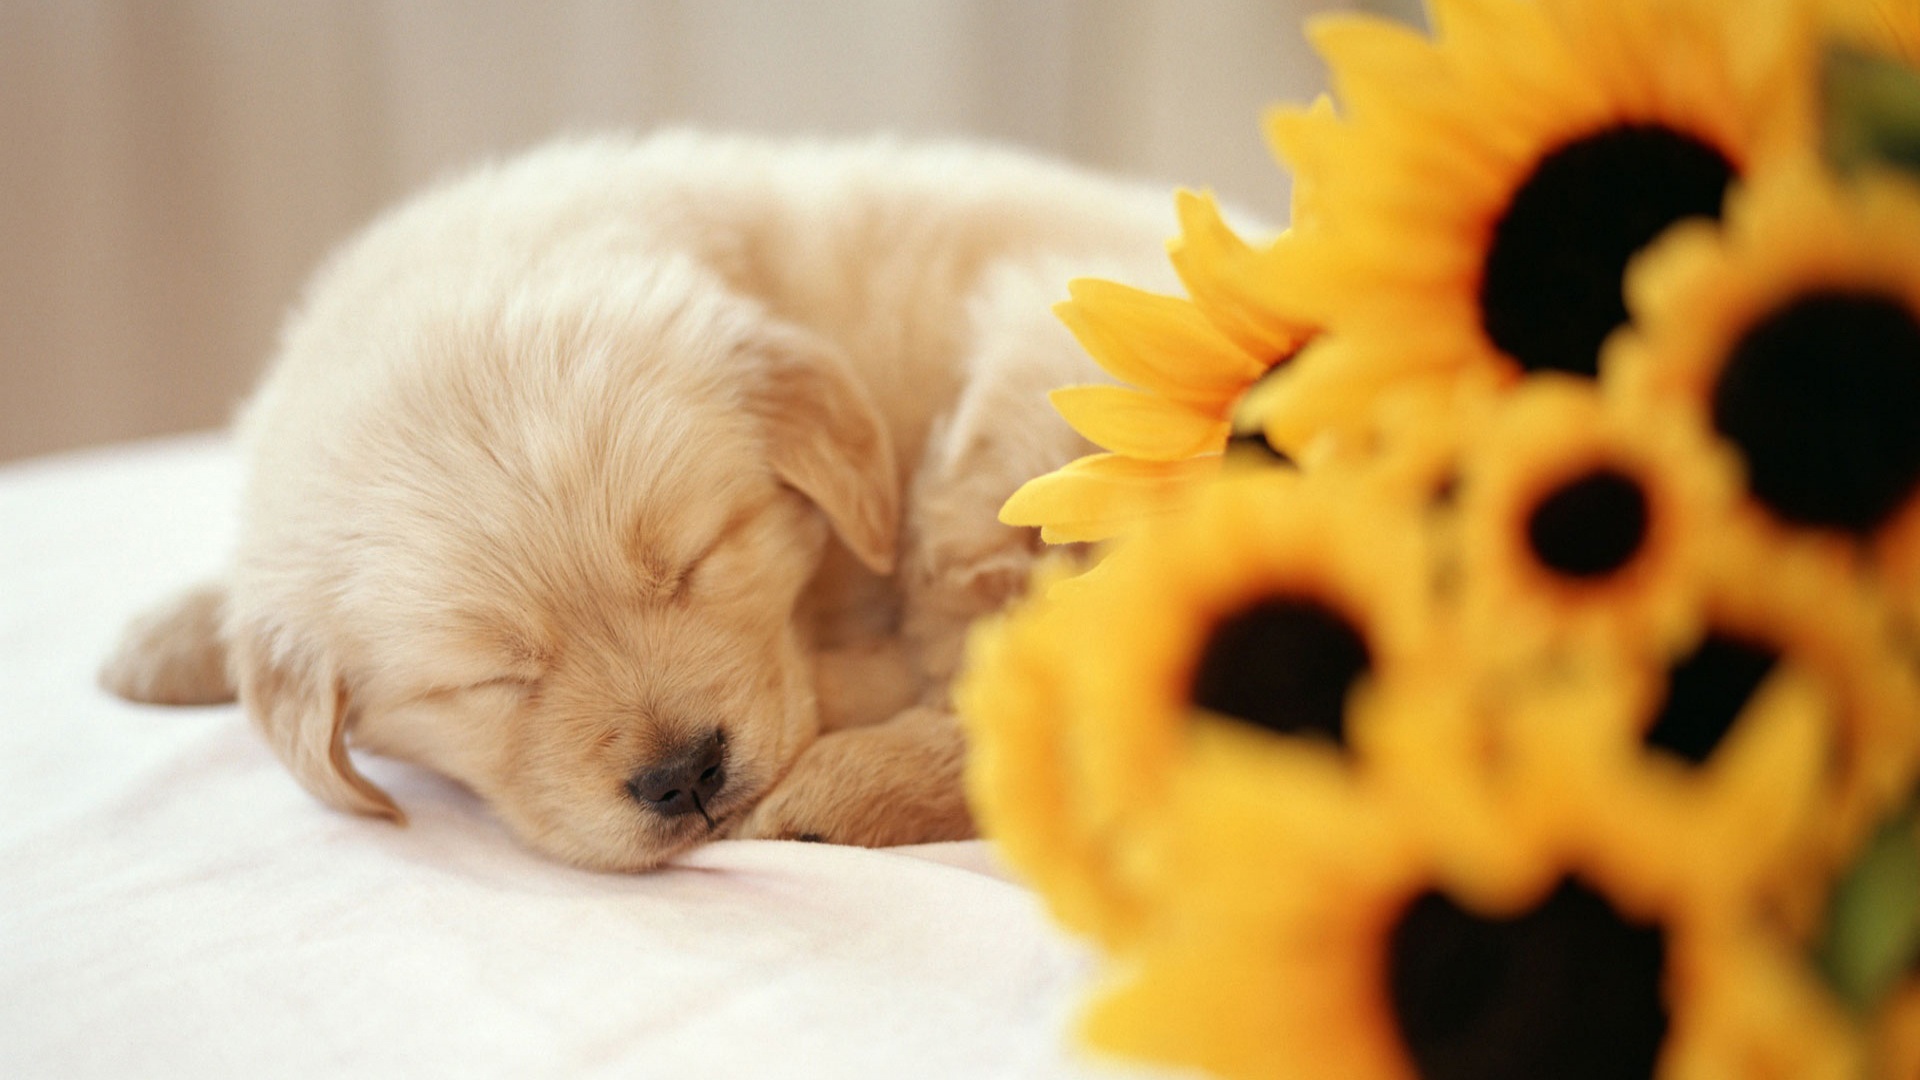 Spring Desktop Backgrounds with Puppies   HD Wallpapers 1920x1080